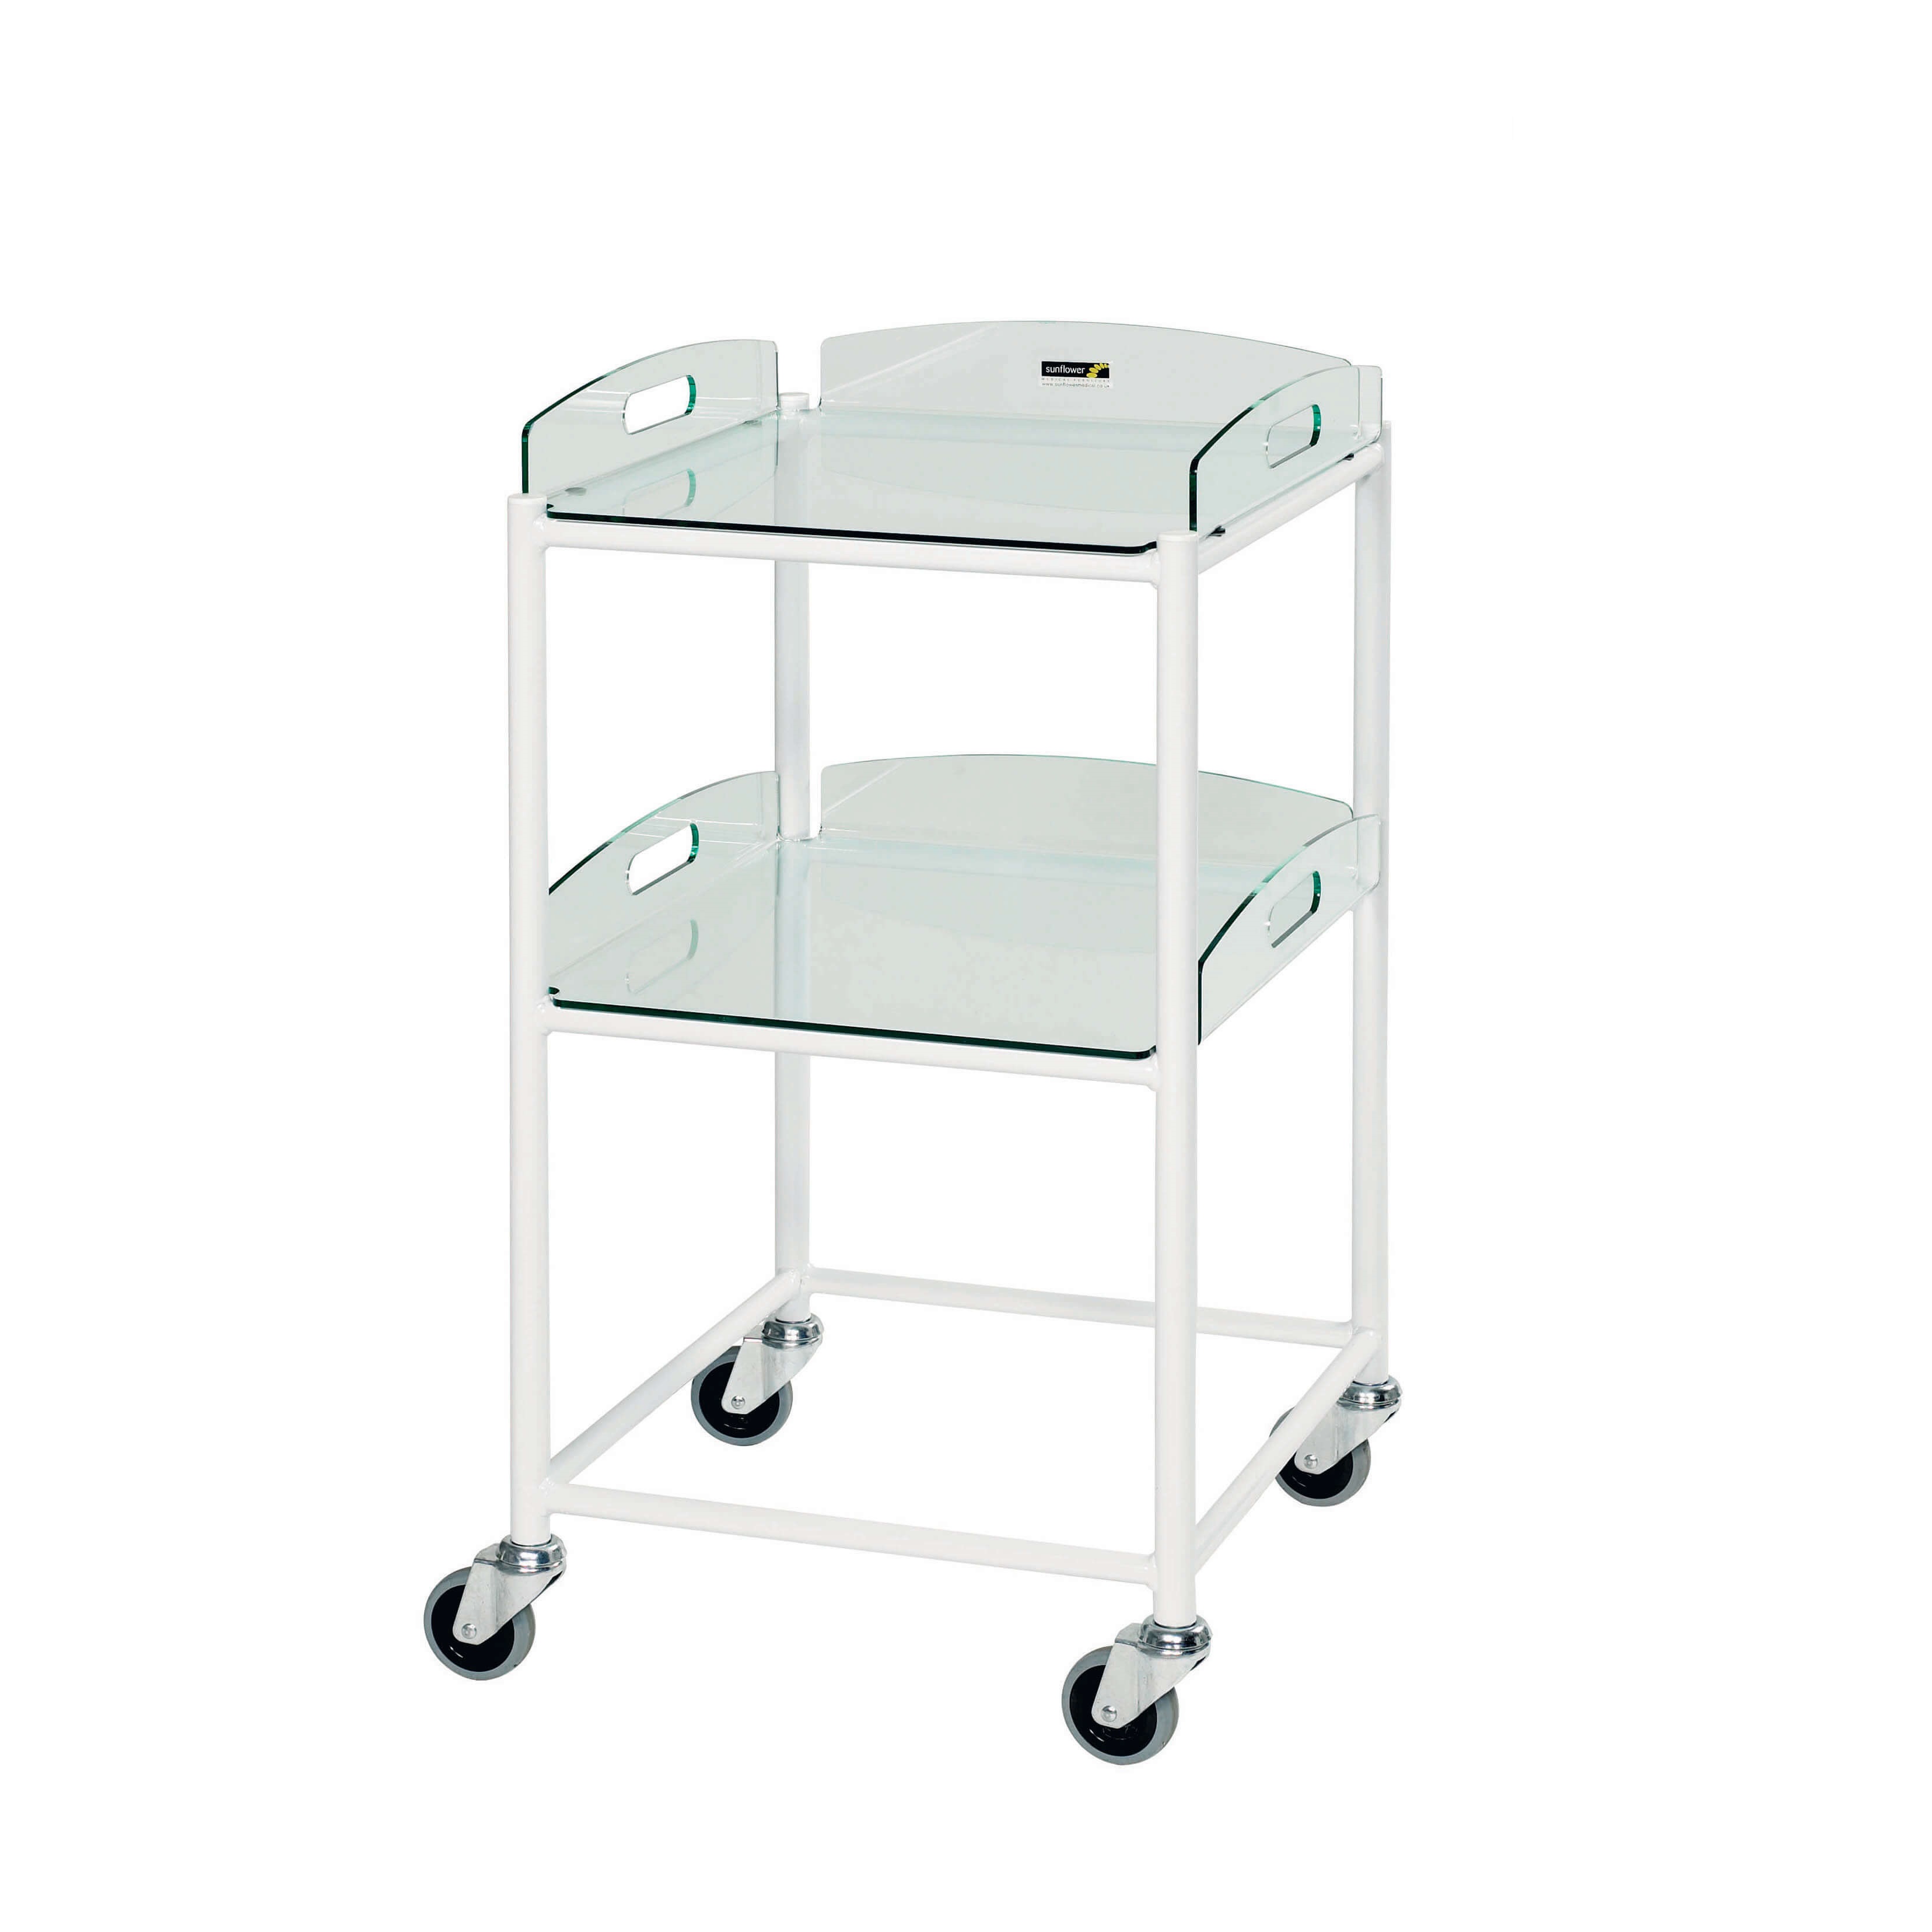 Dressing Trolley, 2 Glass Effect Safety Trays [Sun-DT4G2]